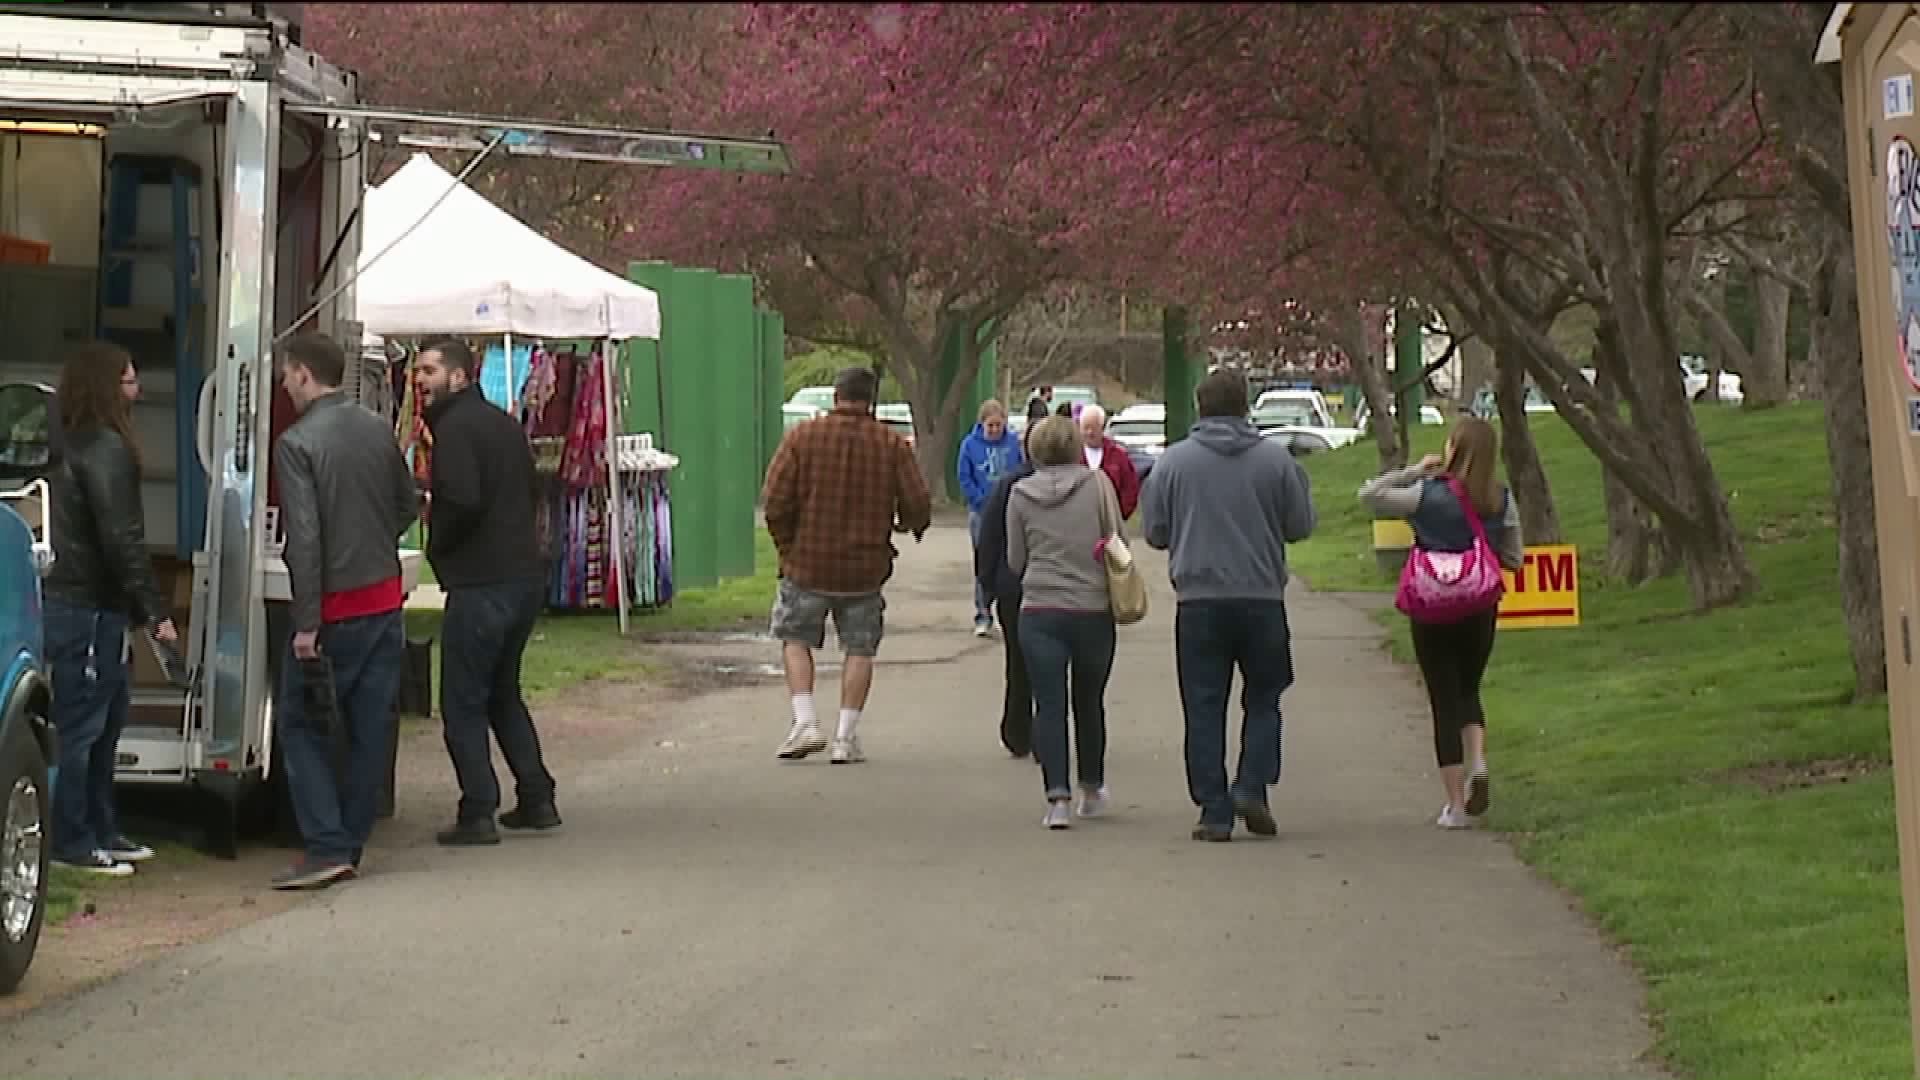 40th Year for Cherry Blossom Festival in Wilkes-Barre